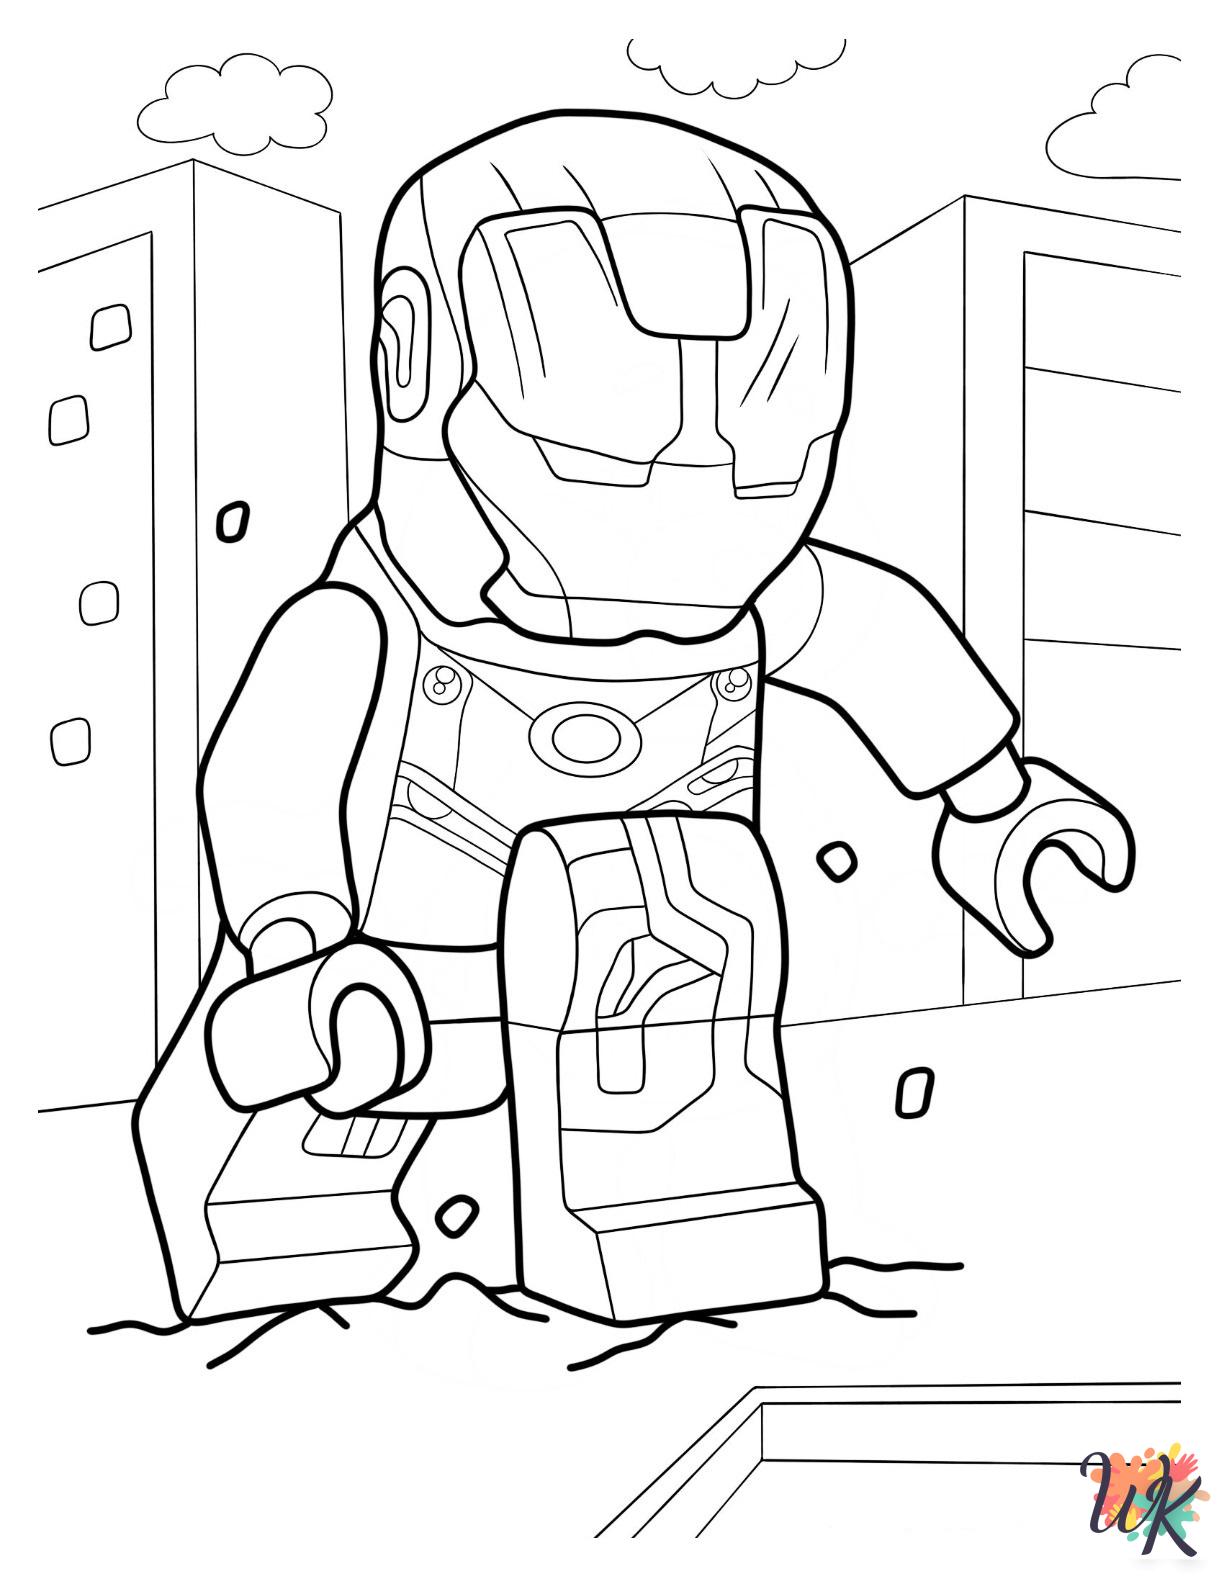 Lego Avengers coloring pages pdf